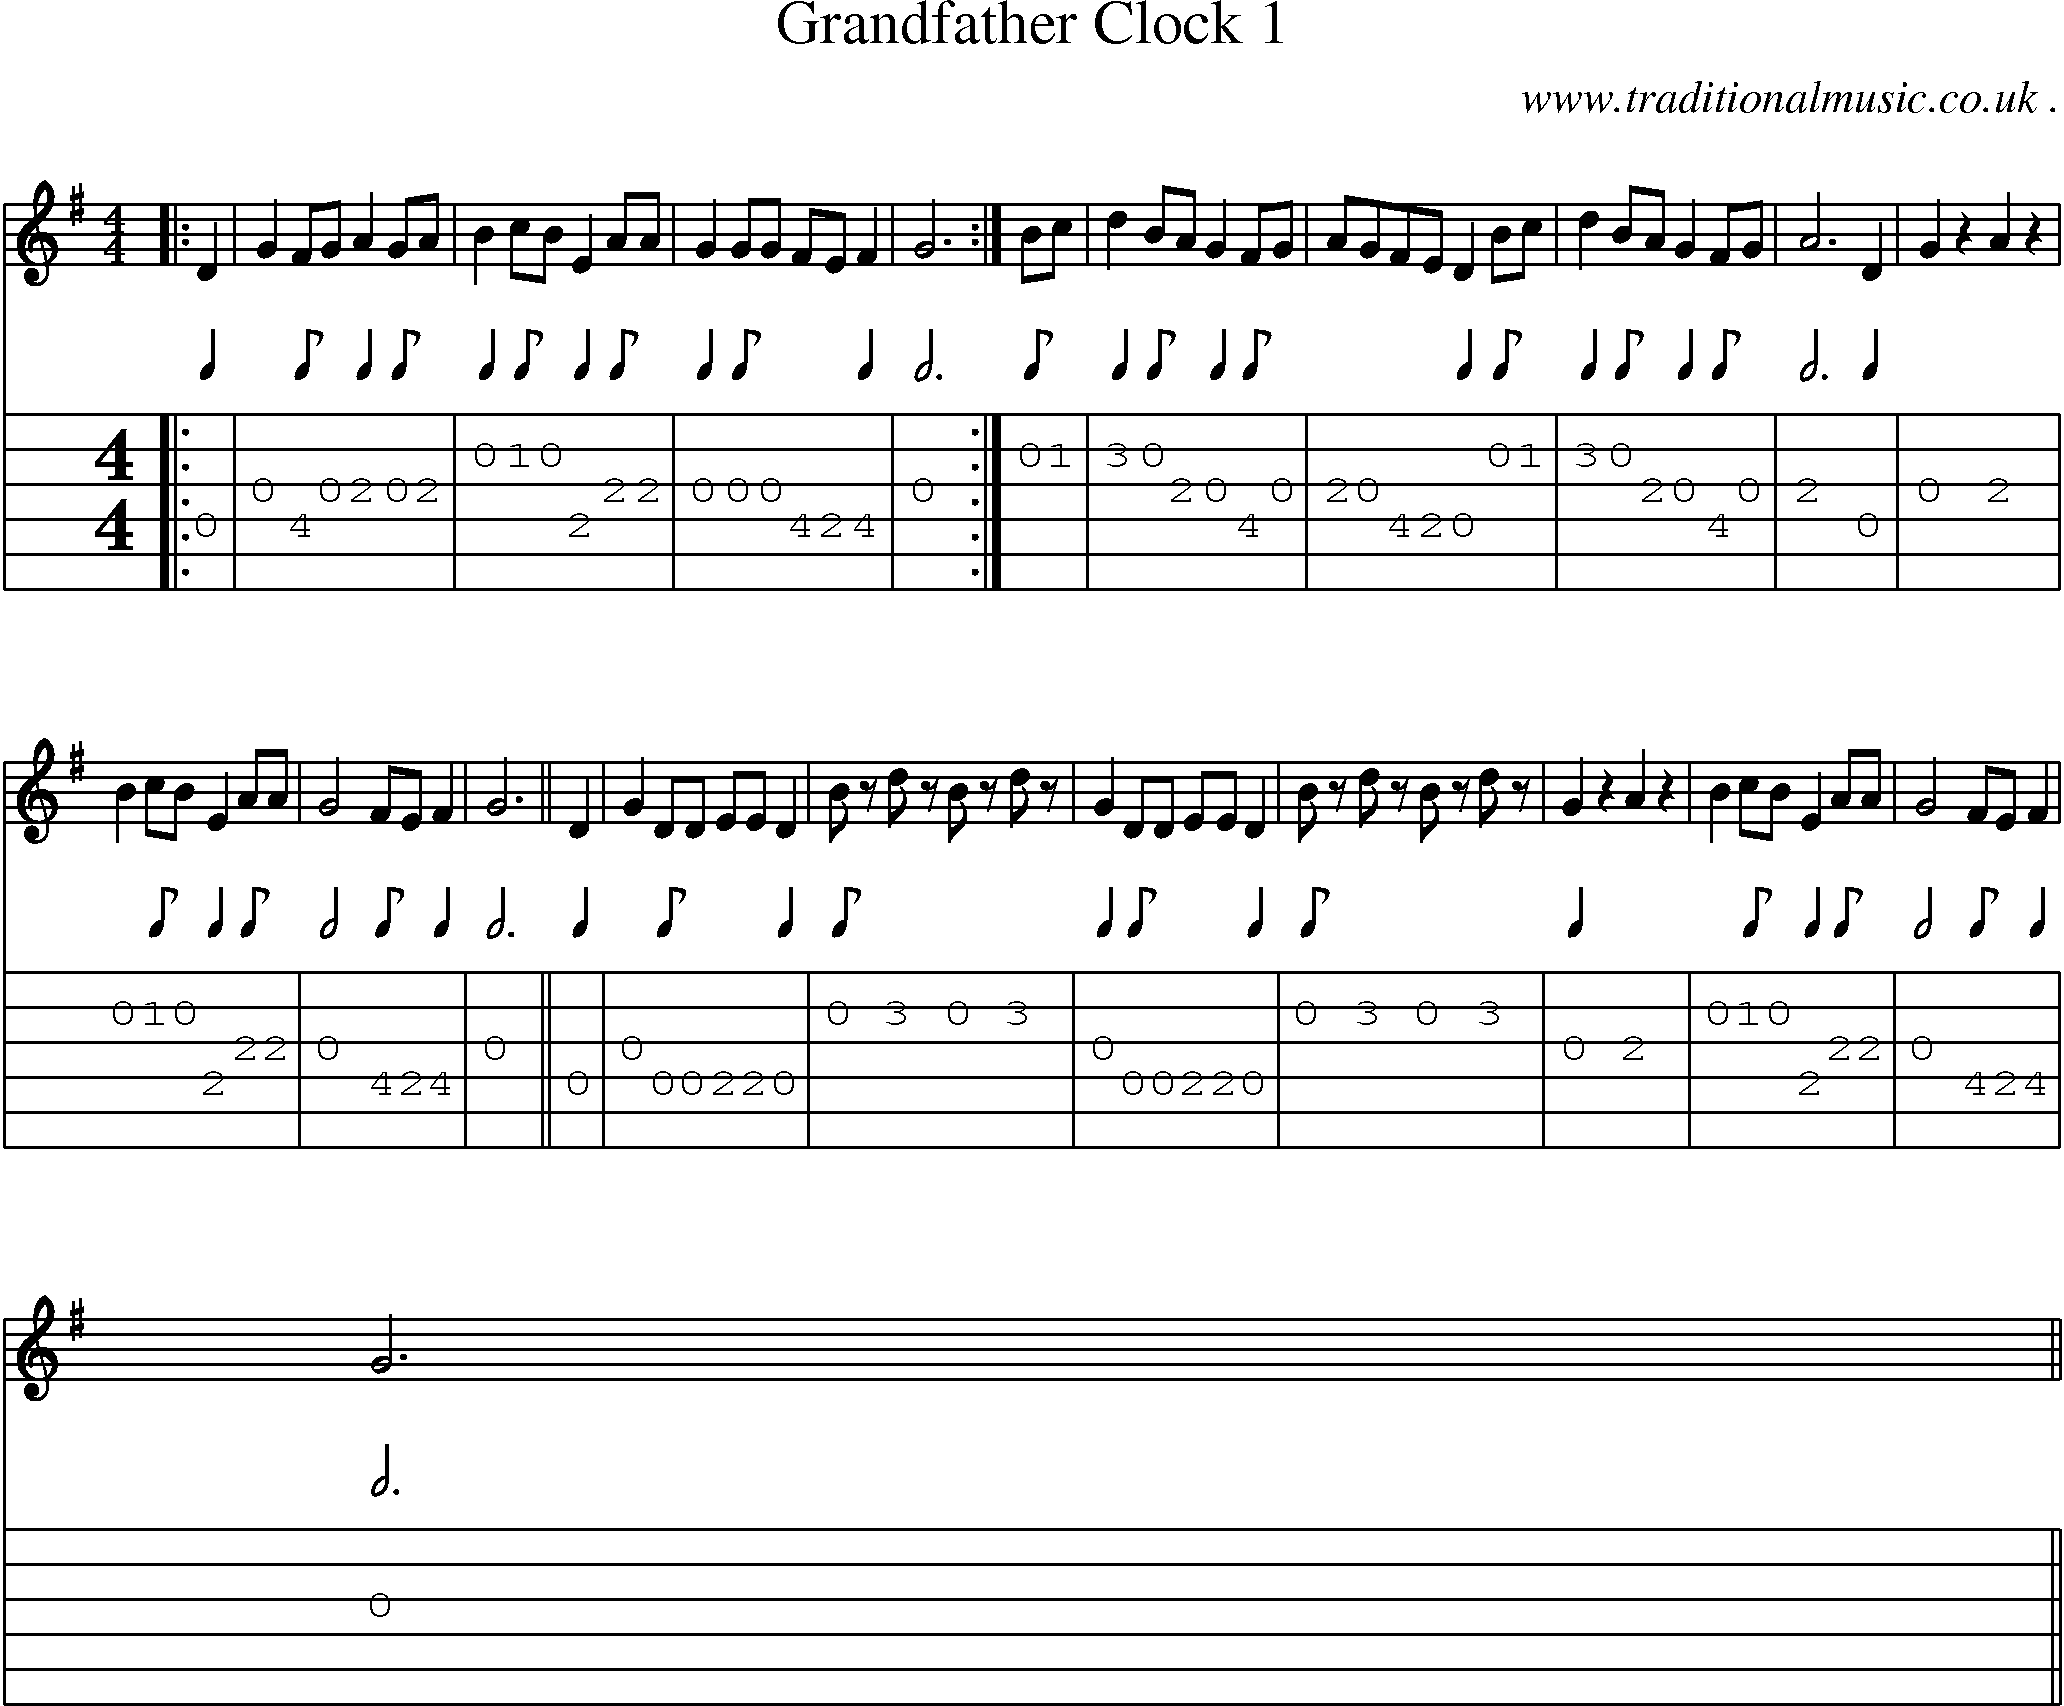 Music Score and Guitar Tabs for Grandfather Clock 1